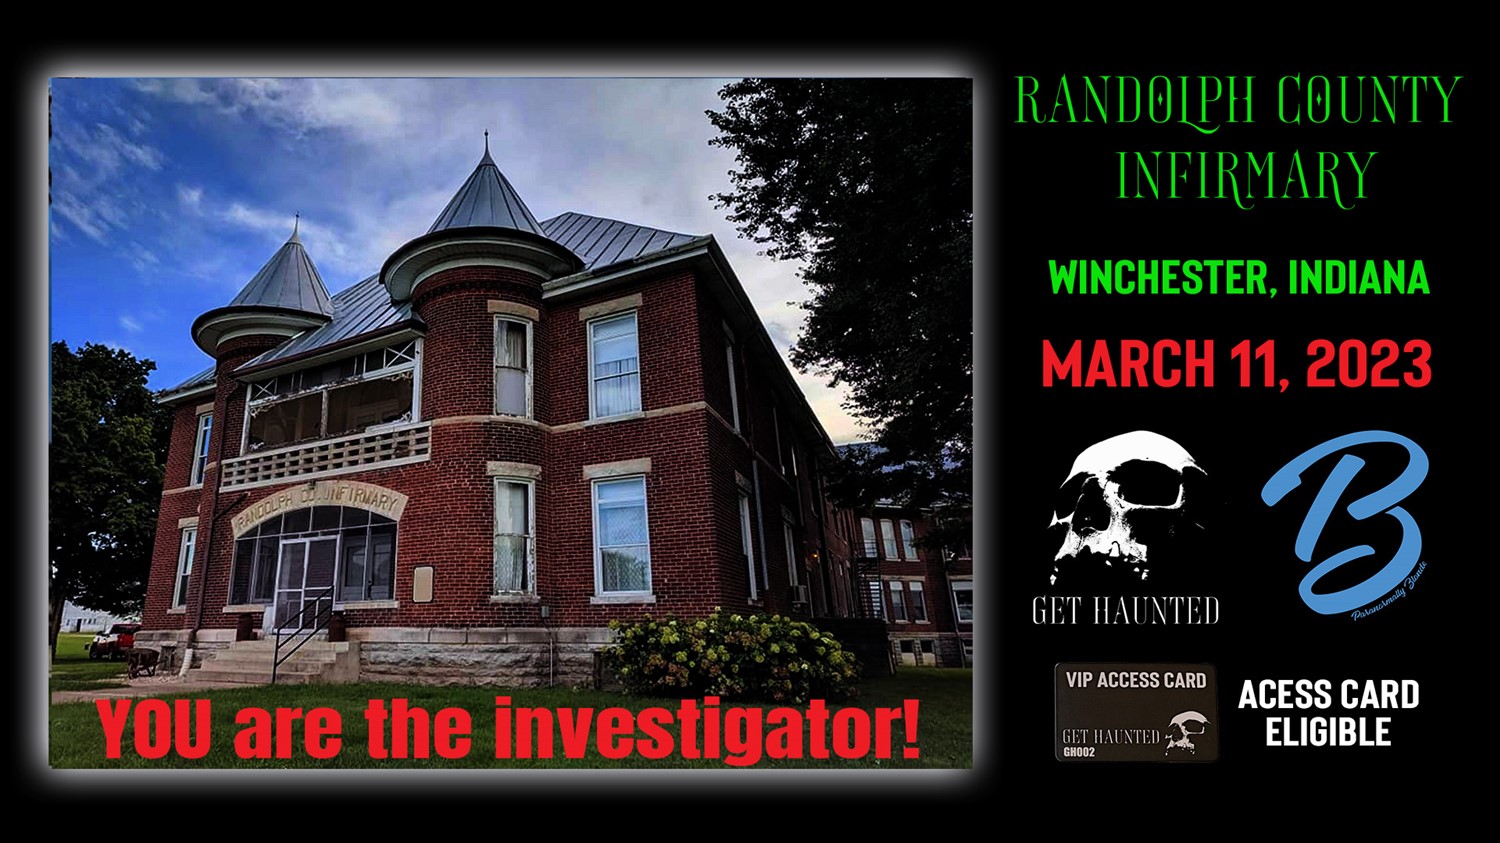 Randolph County Infirmary - Paranormal Experience!  on Mar 11, 19:00@Randolph County Asylum - Buy tickets and Get information on Thriller Events thriller.events